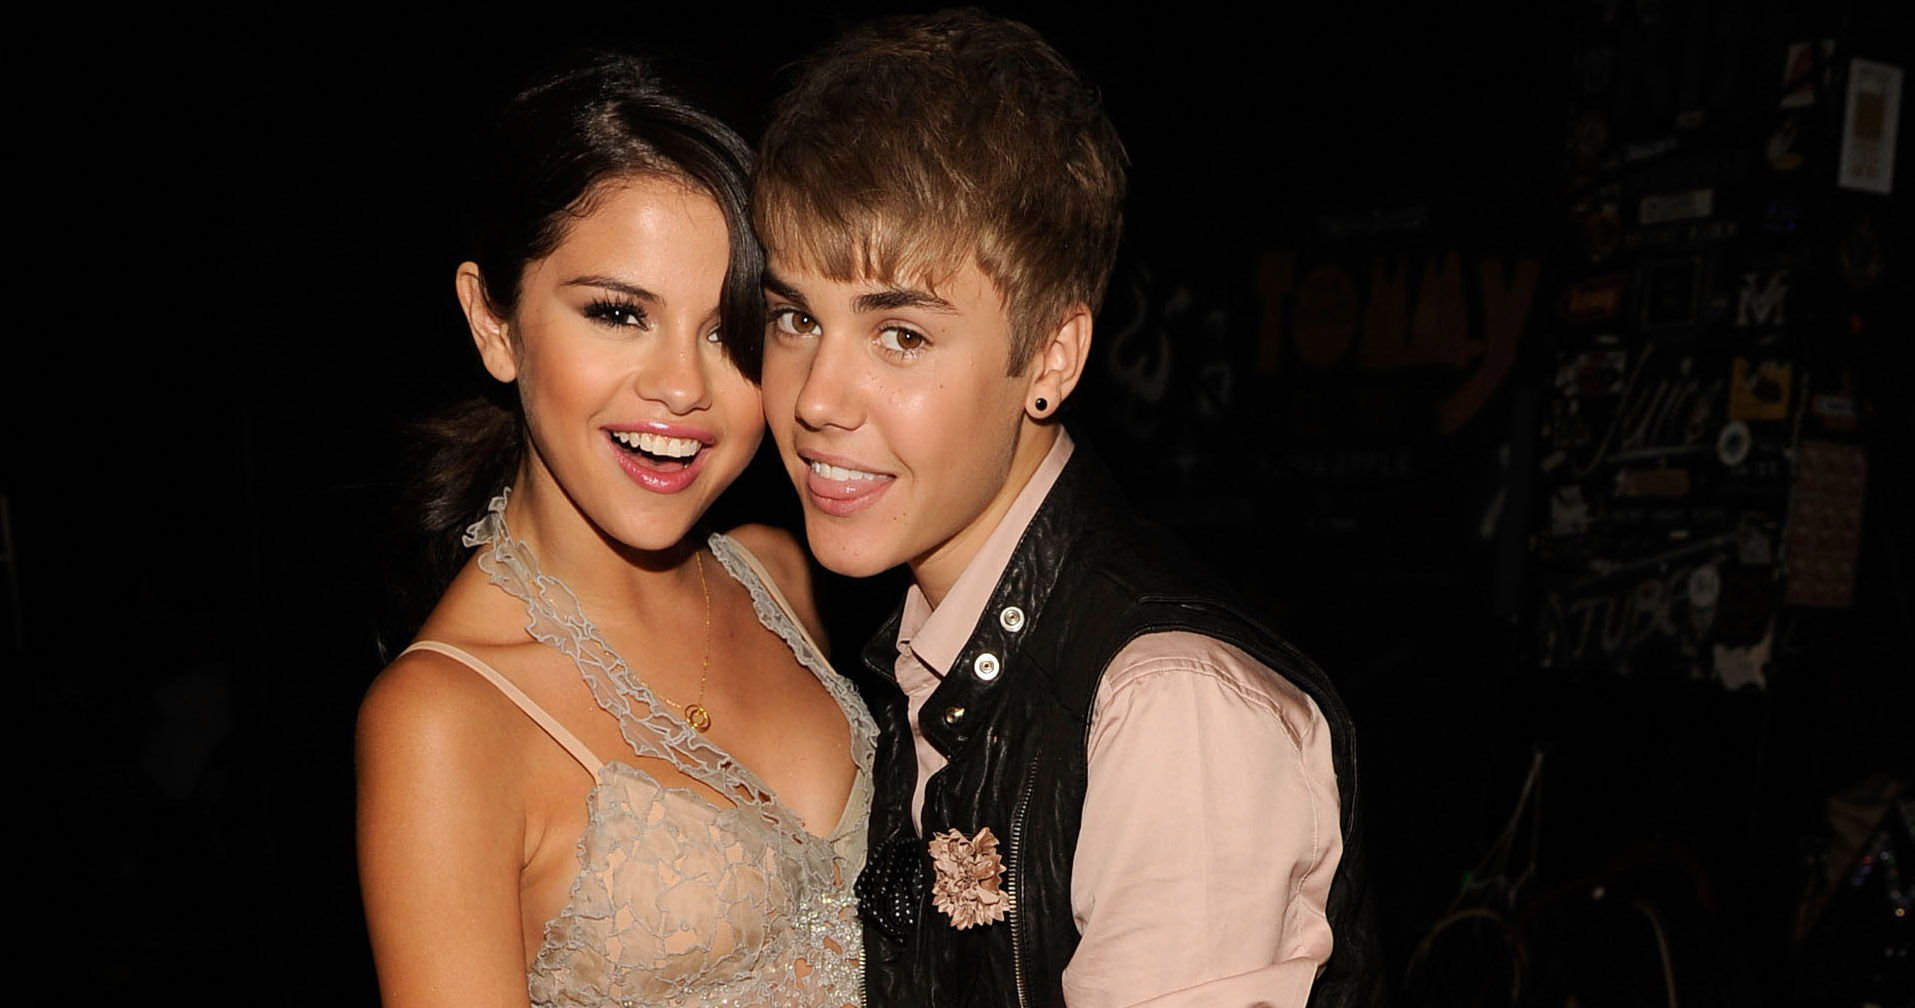 Are justin bieber and selena gomez dating